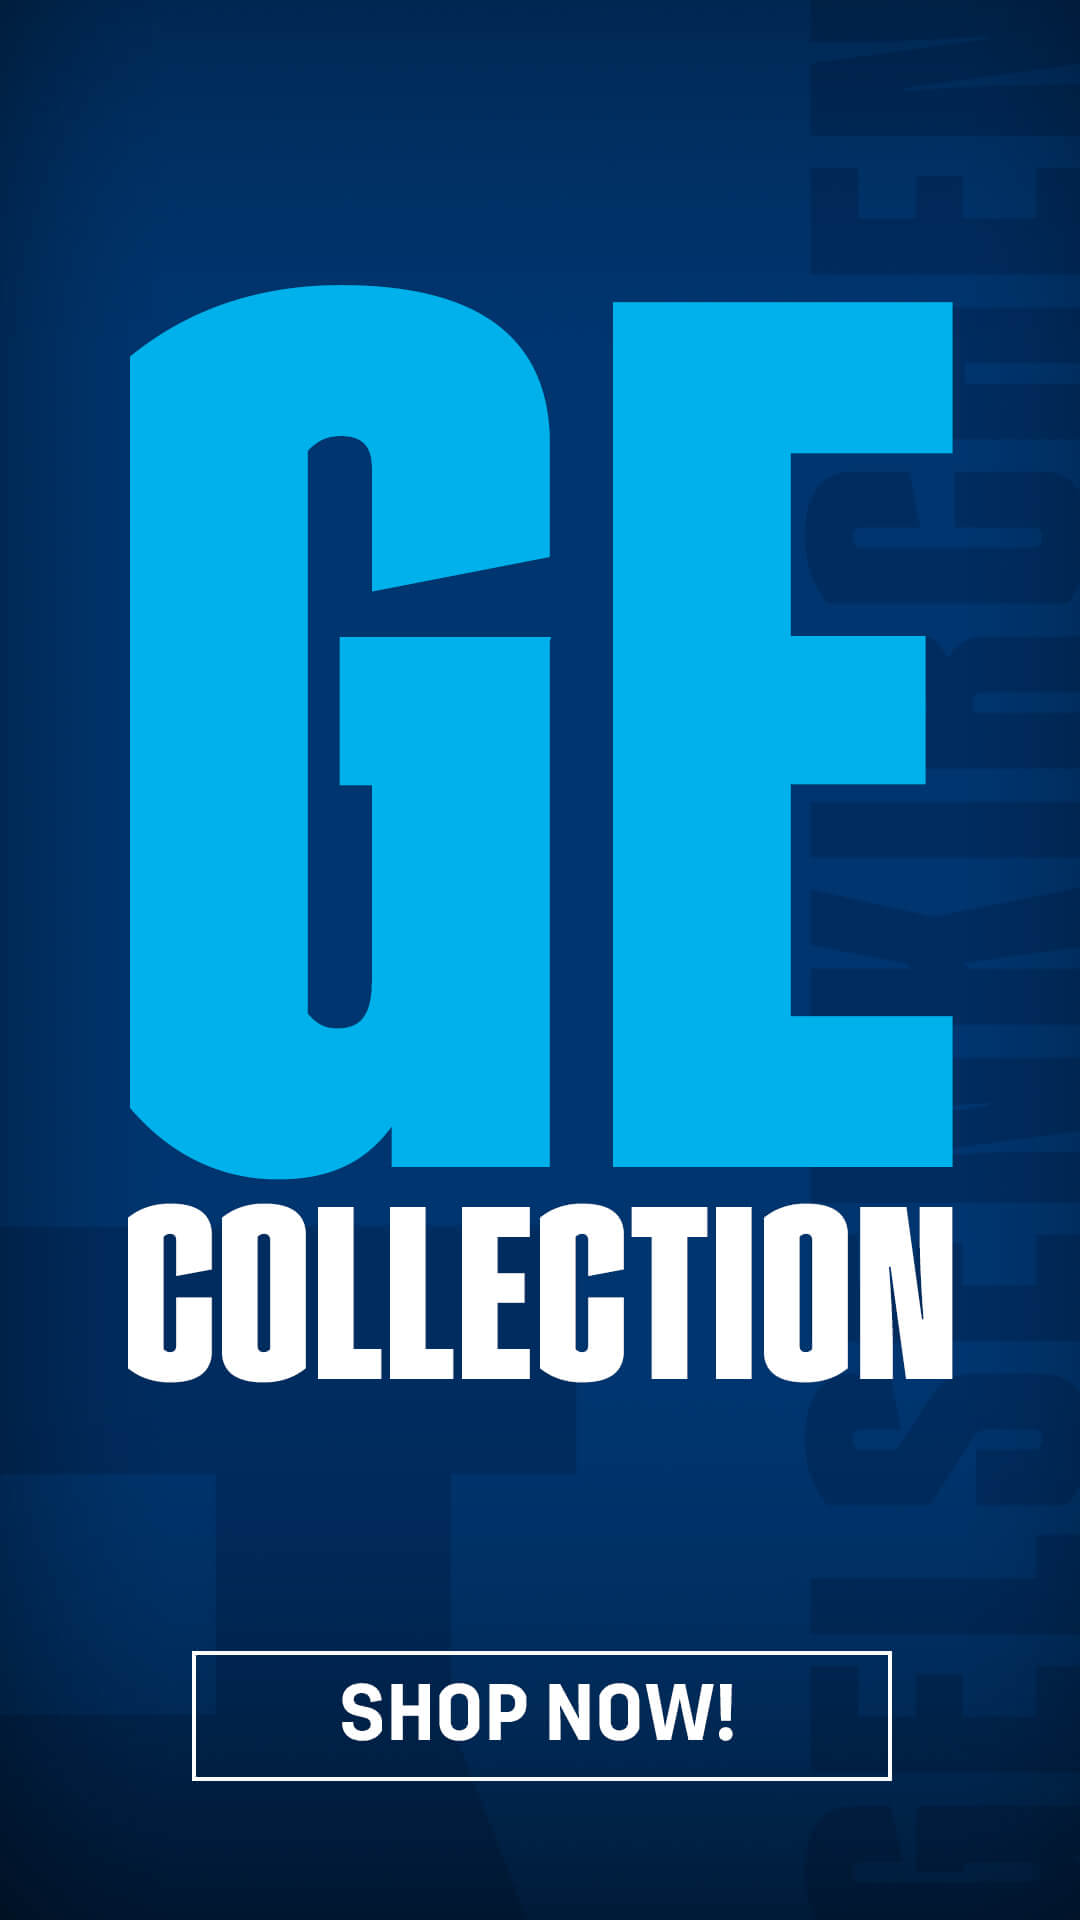 GE collection